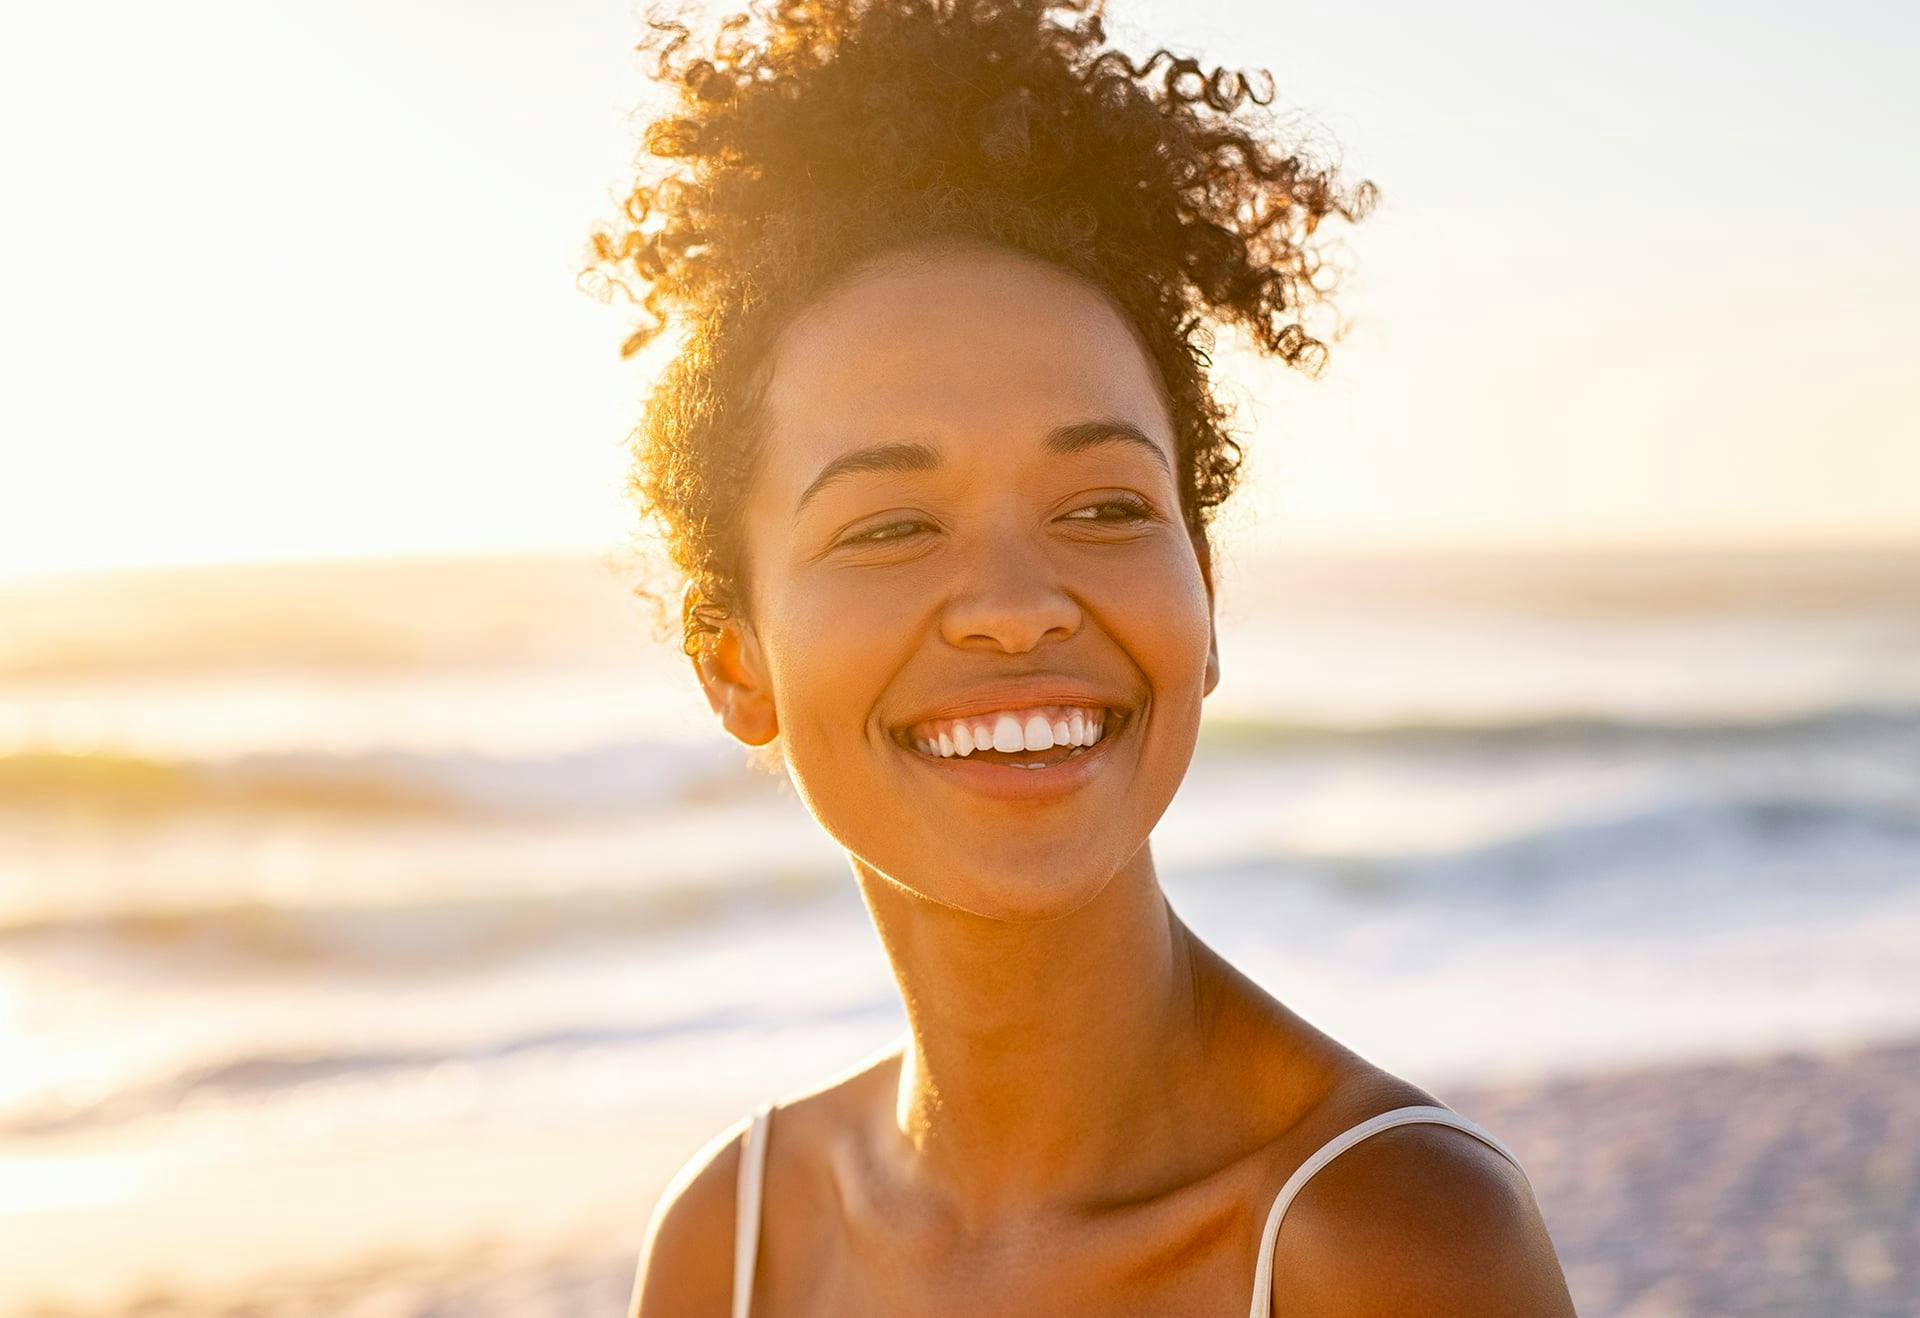 Woman with curly hair, smiling on the beach